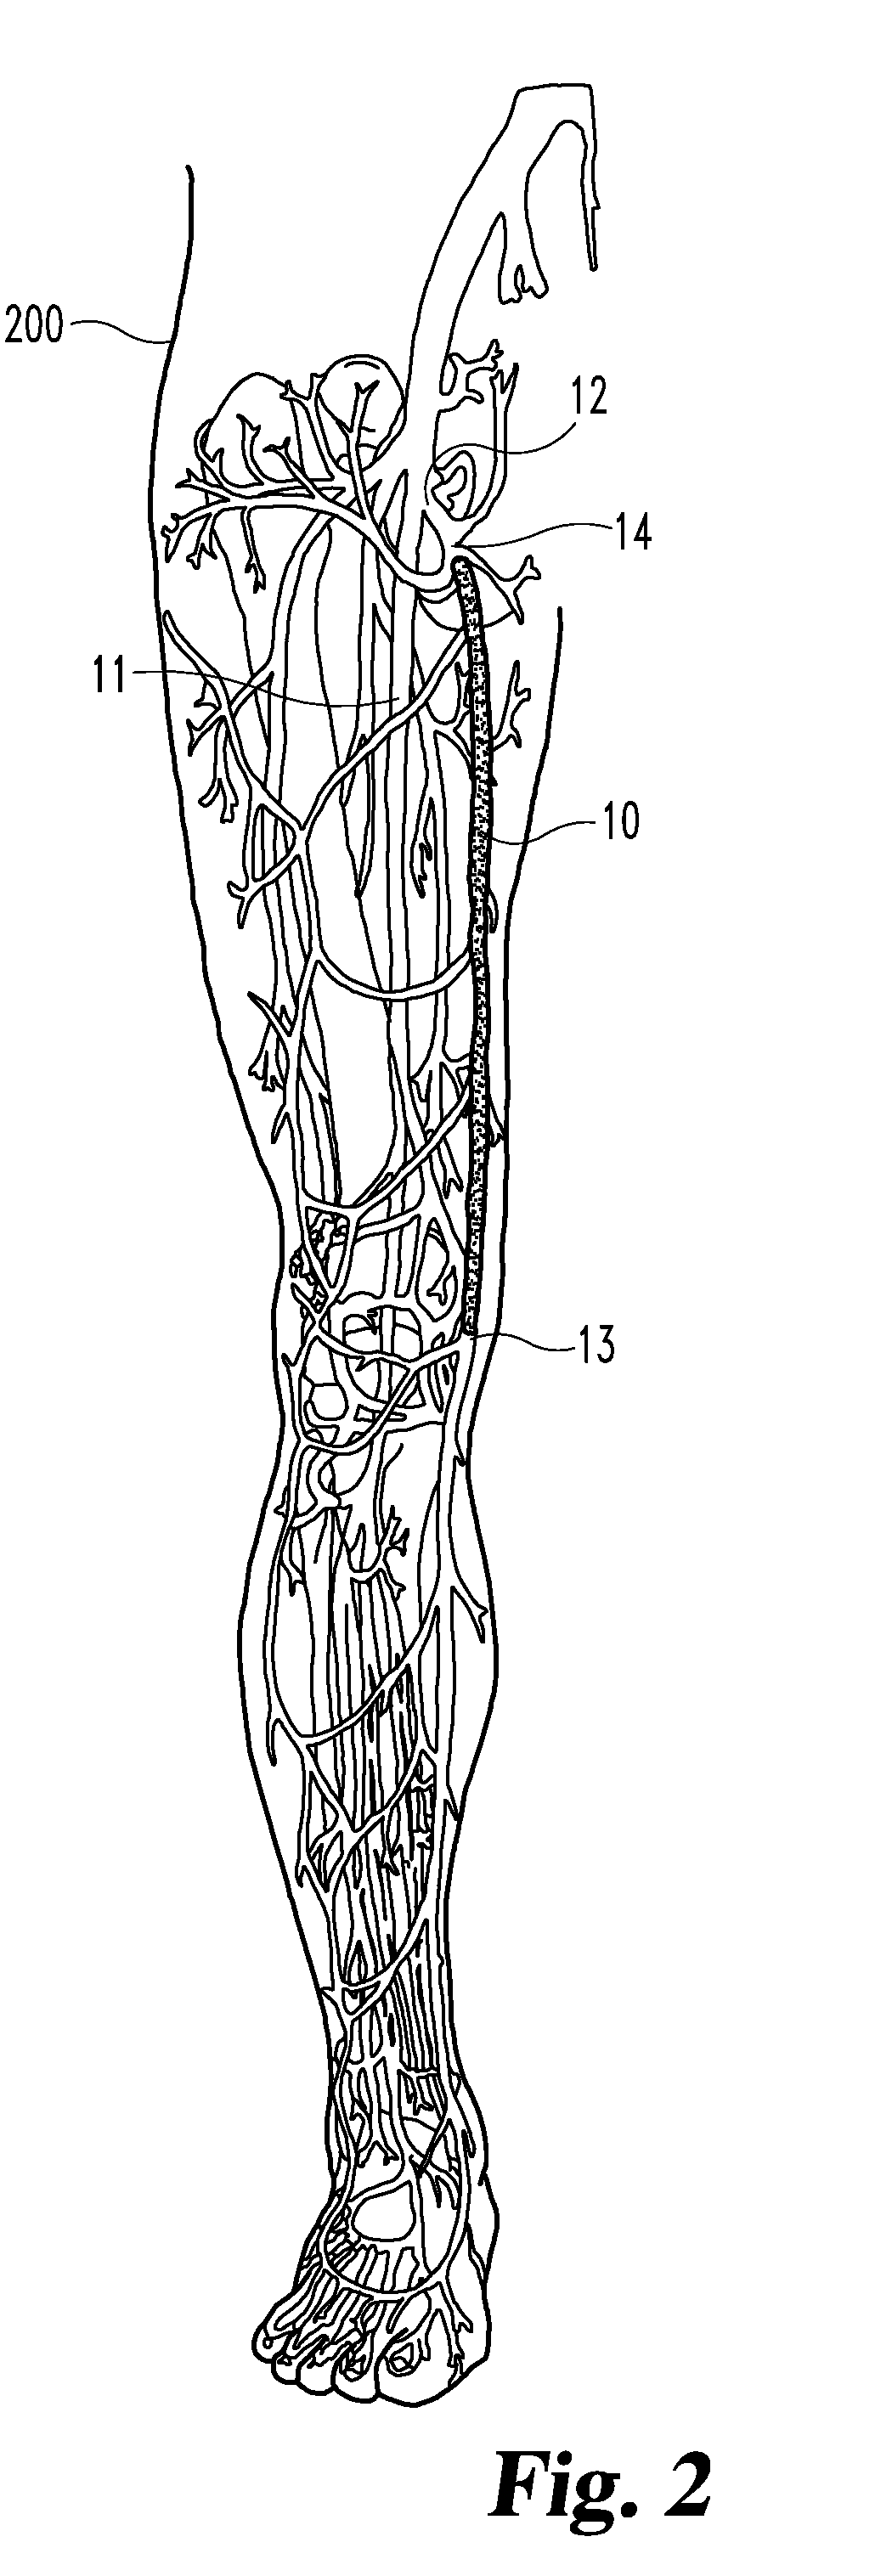 Inverting occlusion devices, methods, and systems